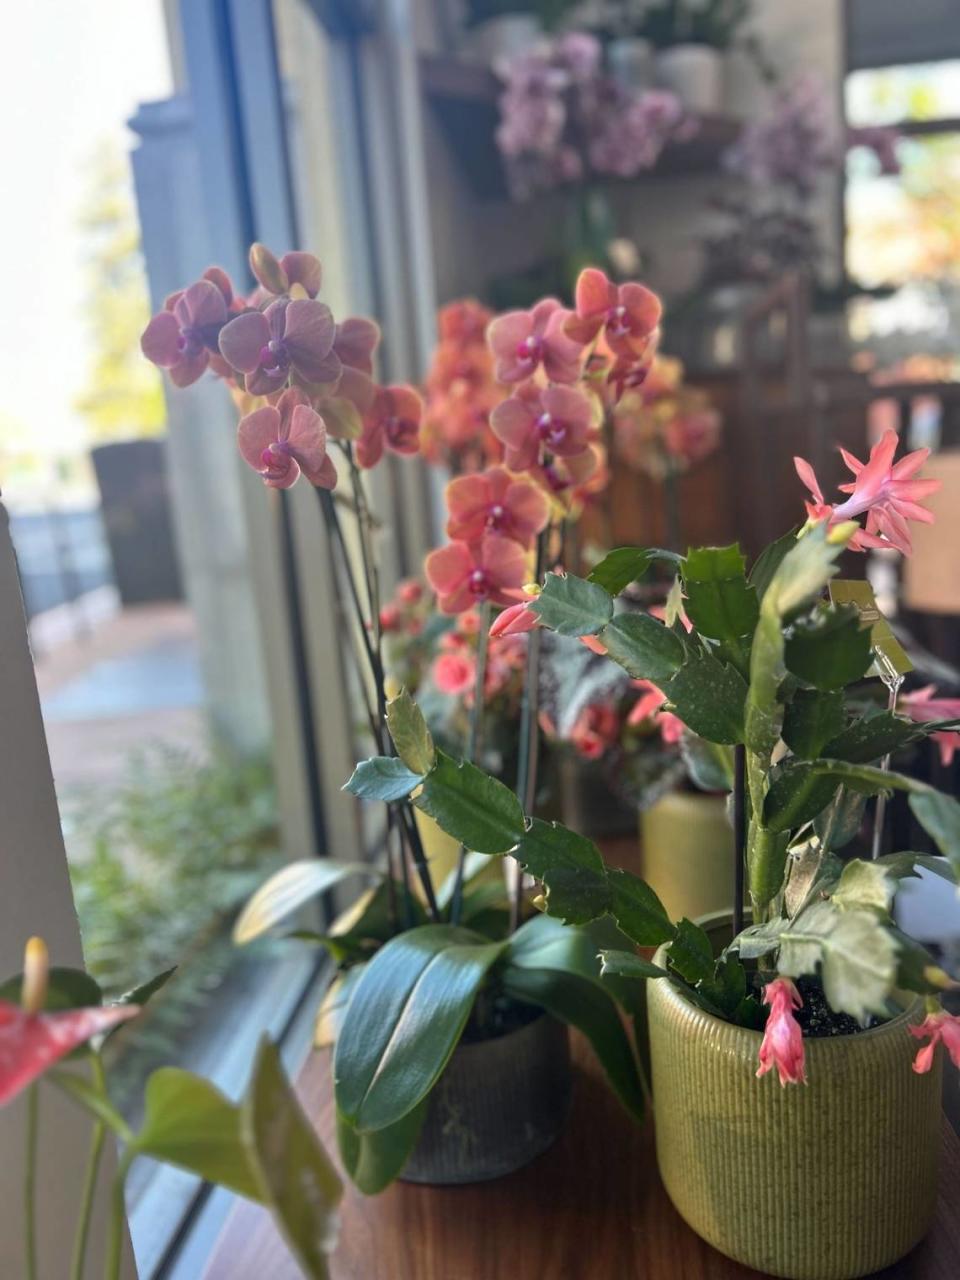 Open Air Flowers has moved to a new location in downtown San Luis Obispo, at 1003 Osos St. The shop sells potted plants, greenery, flowers by the stem and pre-made bouquets and arrangements.